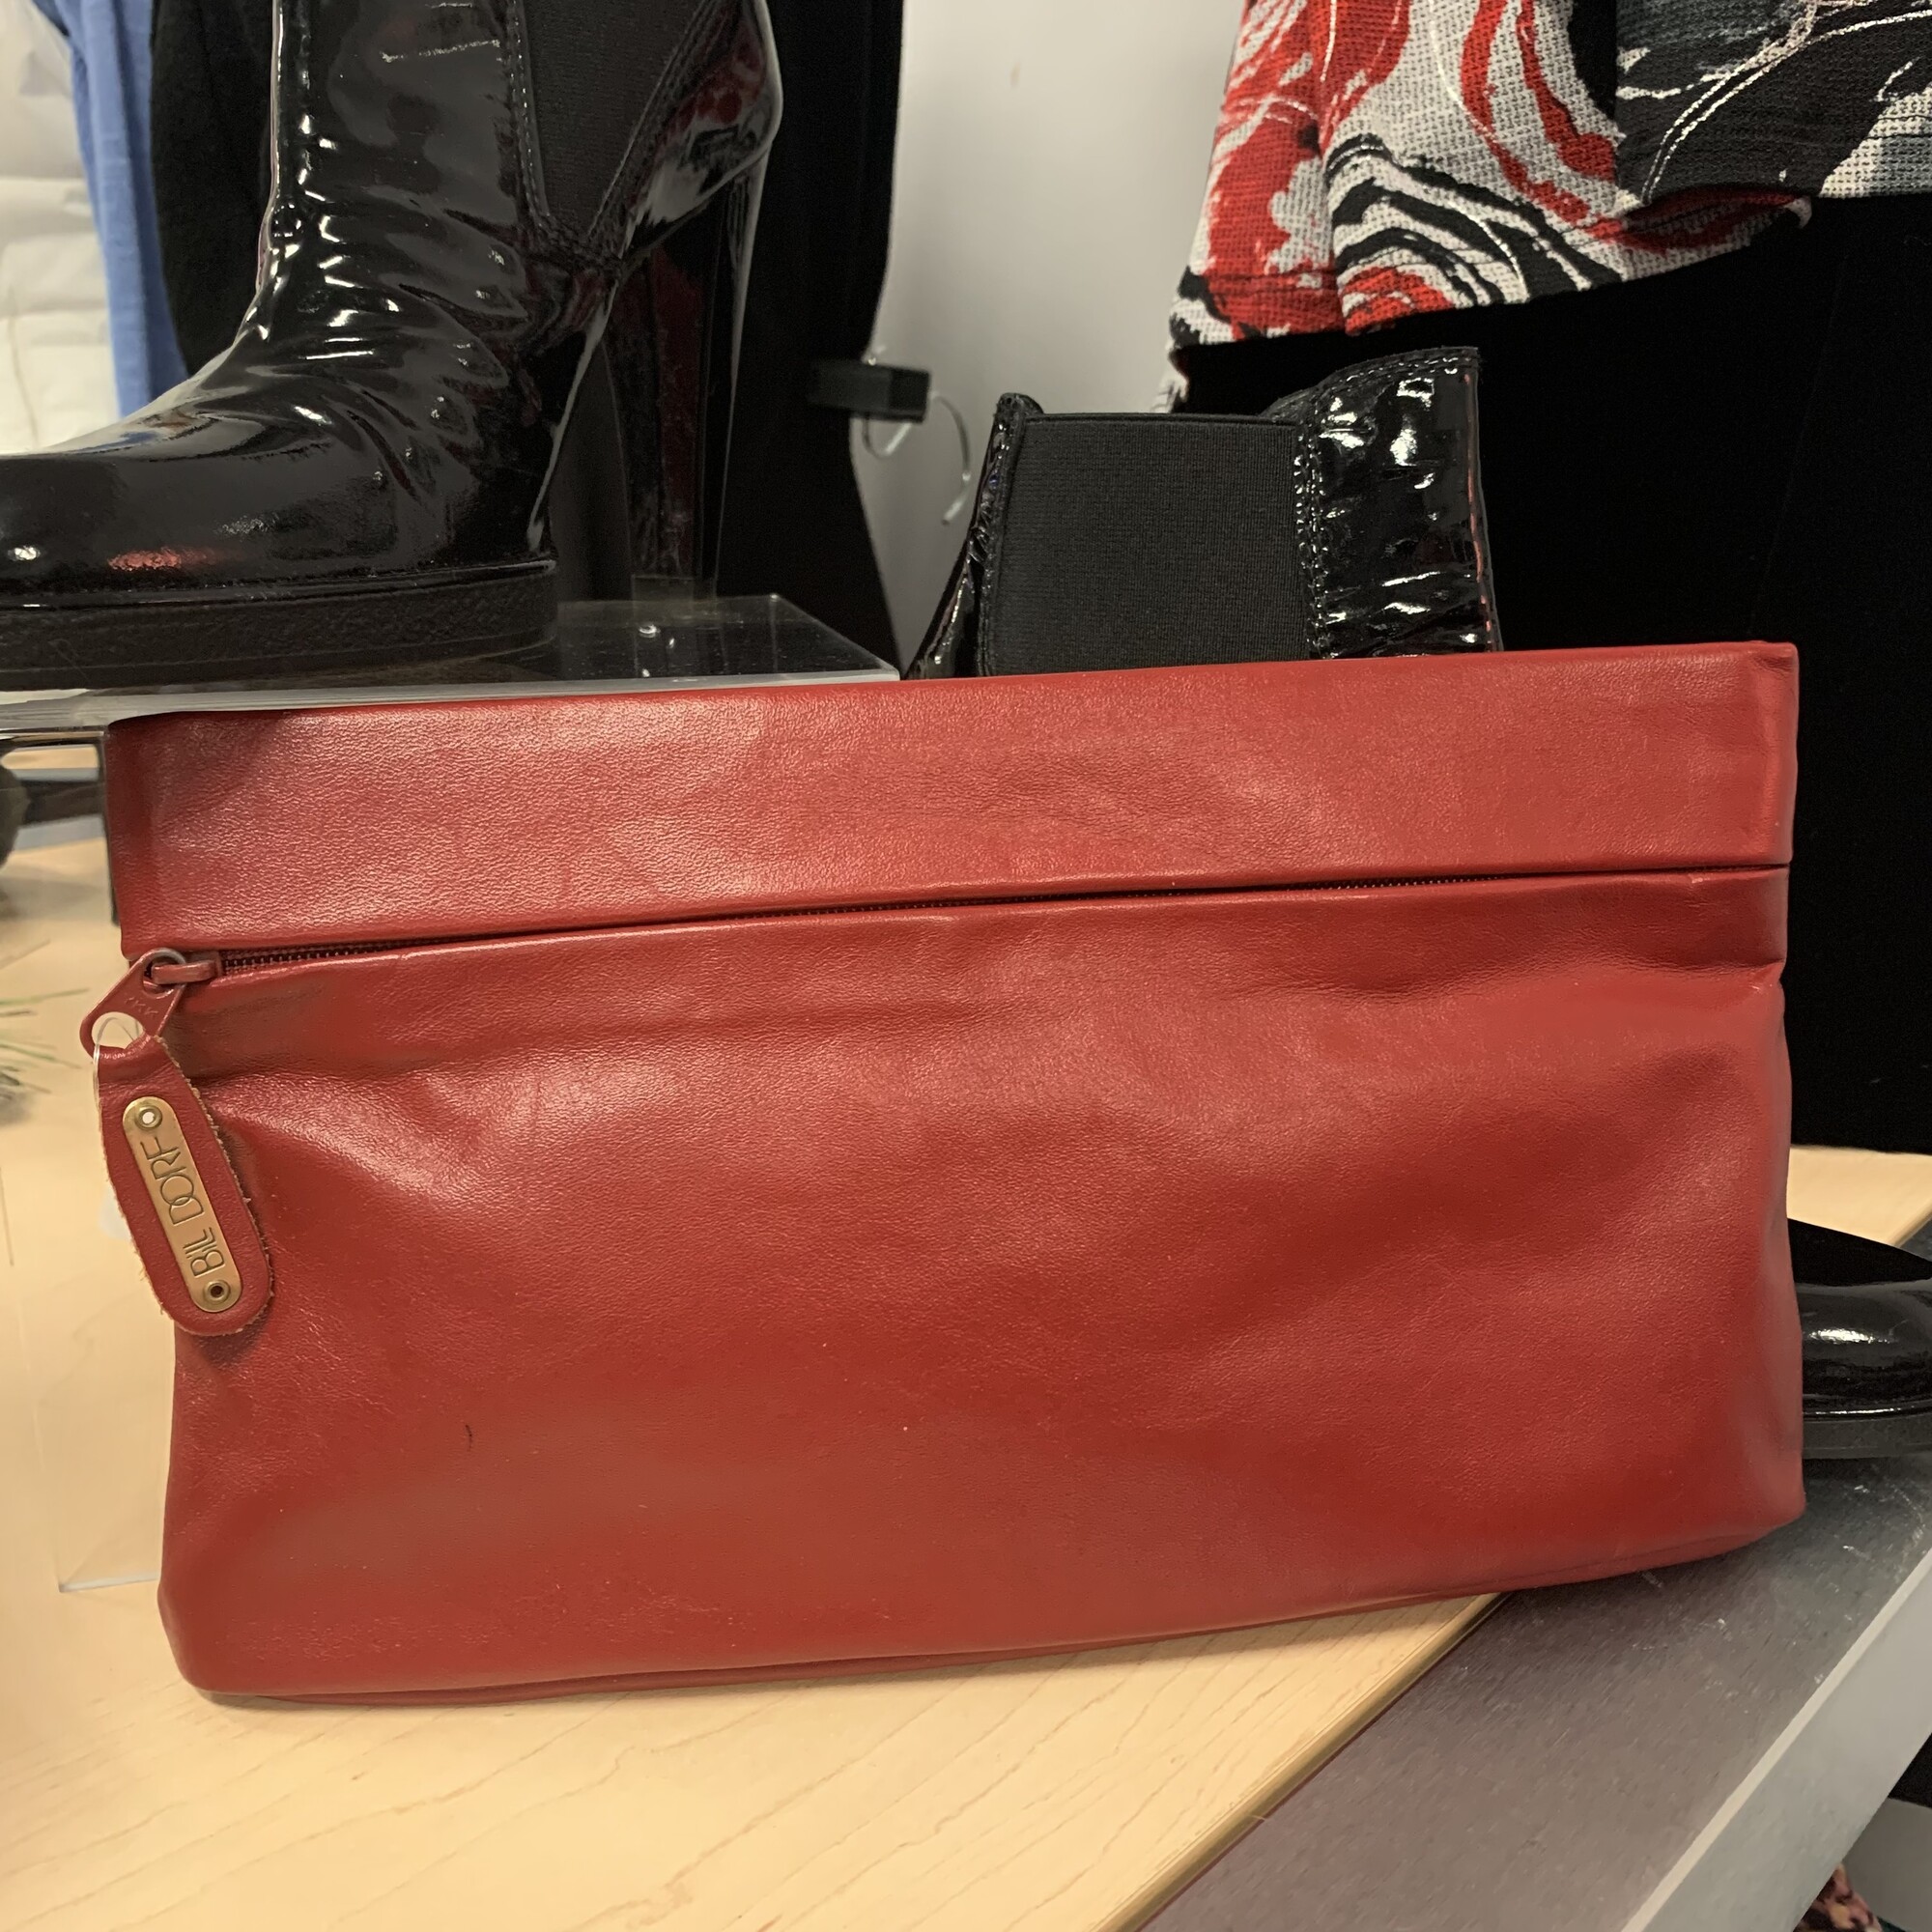 Bill Dorf Clutch + strap,
Colour: red leather
Medium,
With 2 zipper compartments